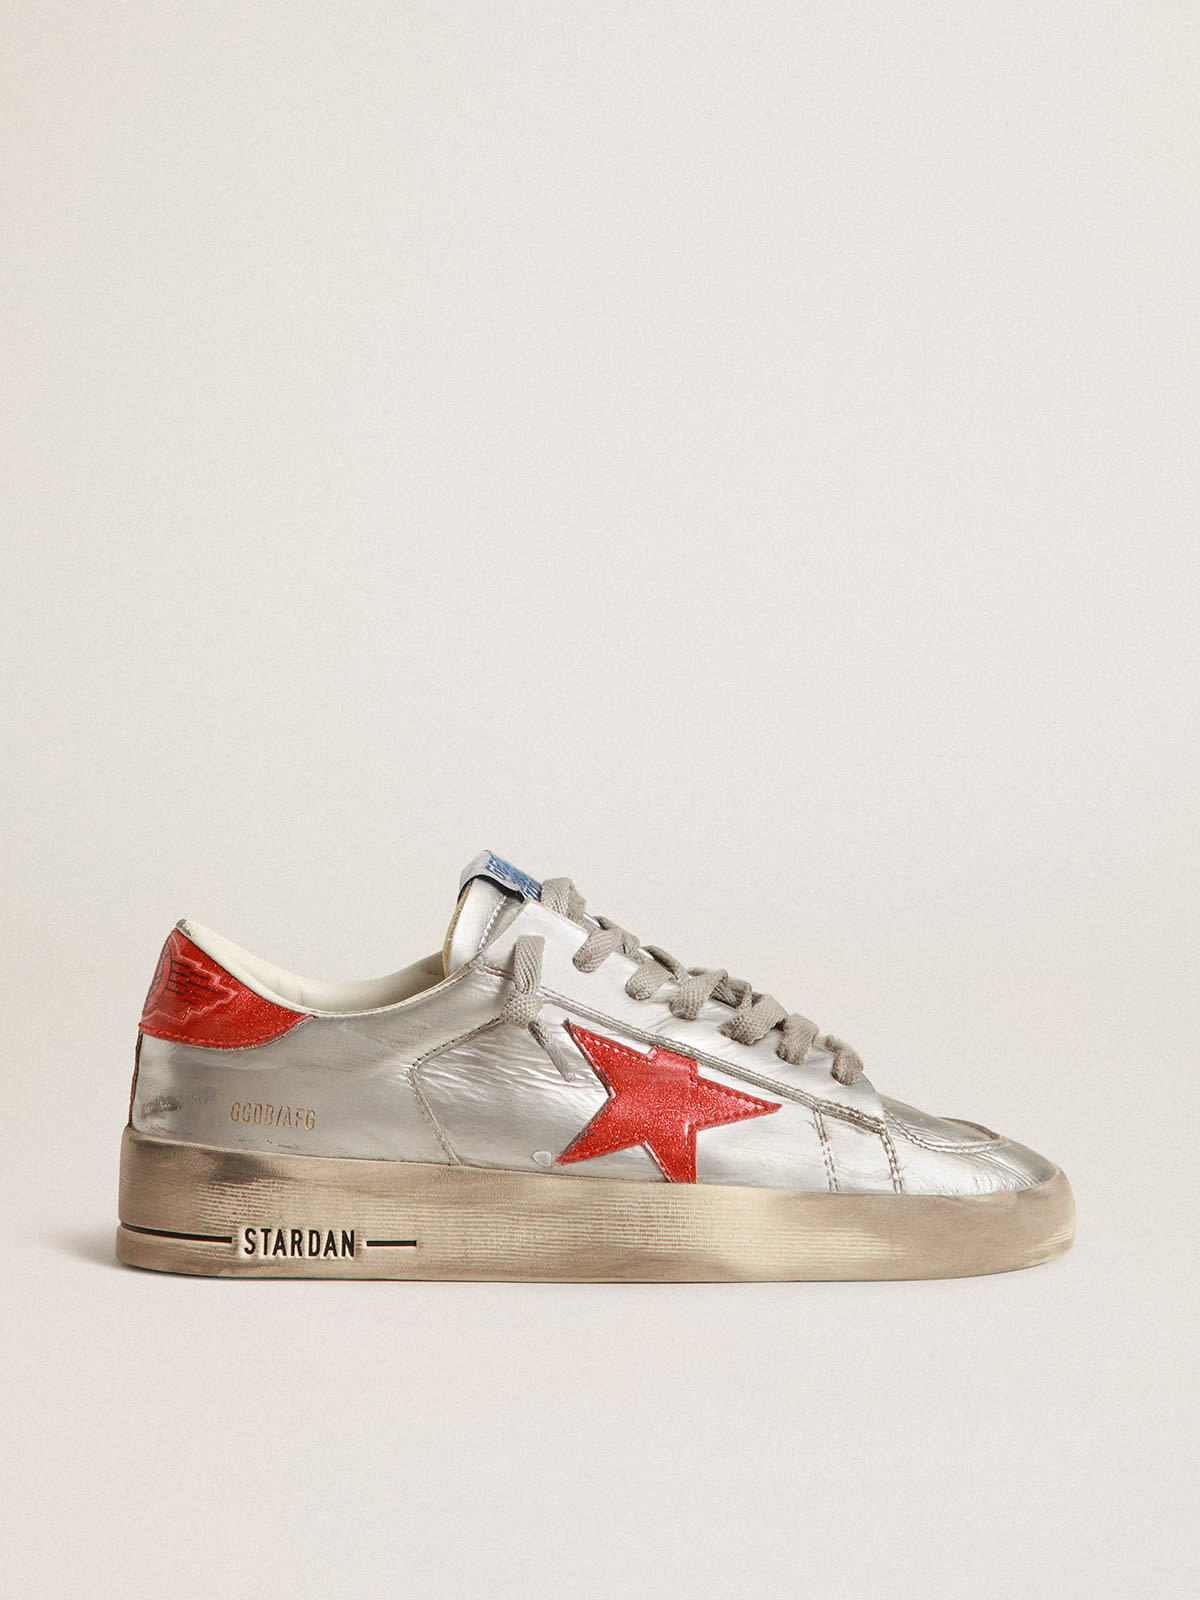 Golden Goose - Men's Stardan in metallic leather with red glitter inserts in 